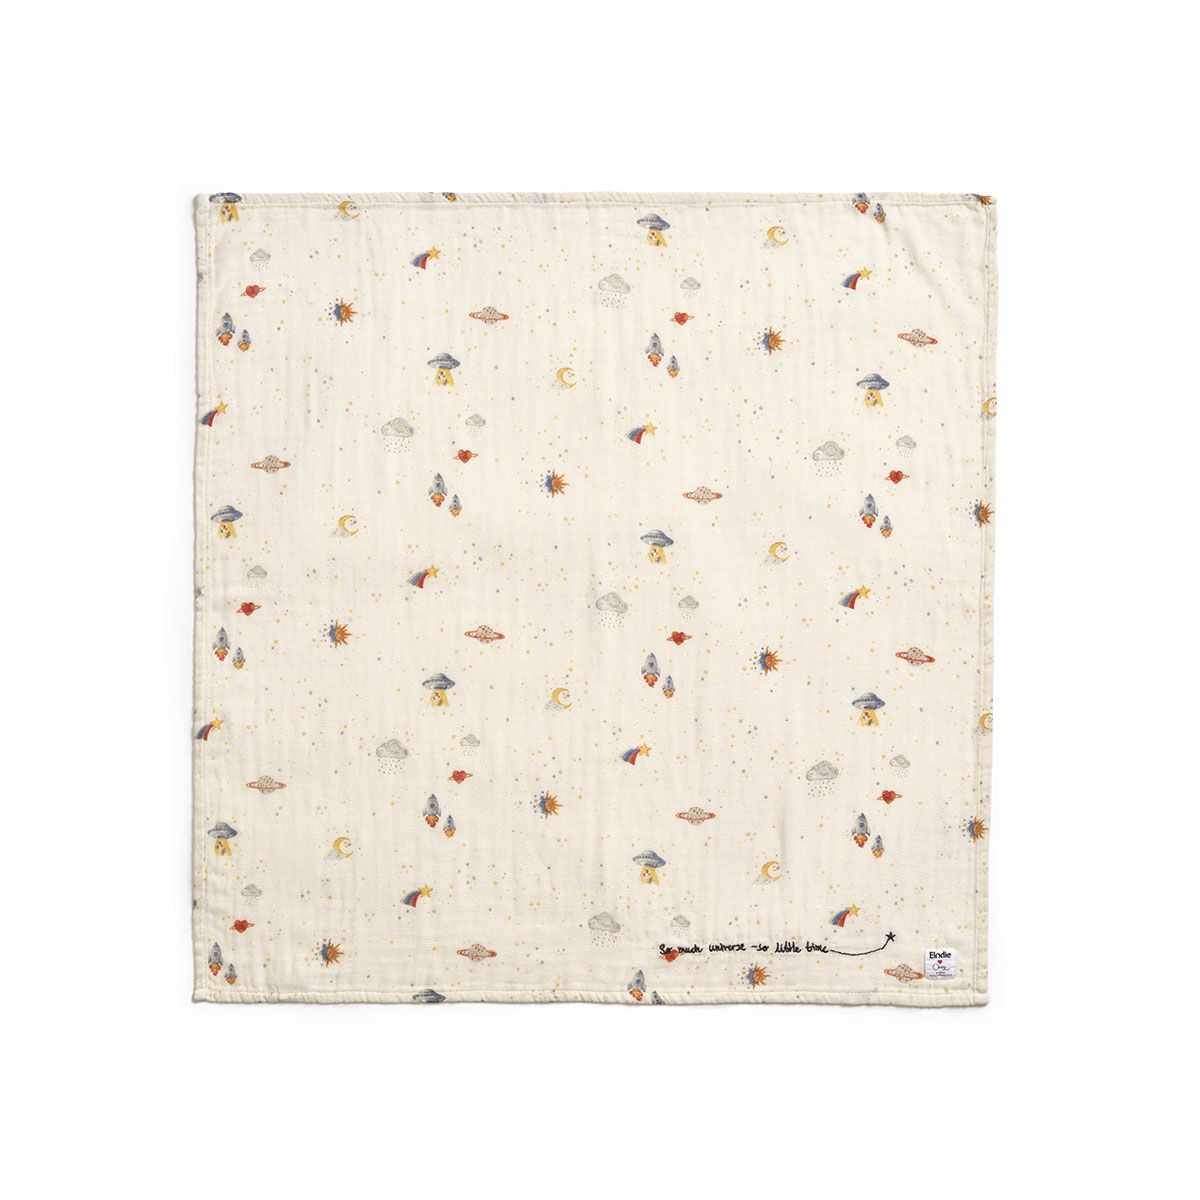 30350153499na-bamboo-muslin-blanket-playground-spaceland-1-ss22-pp